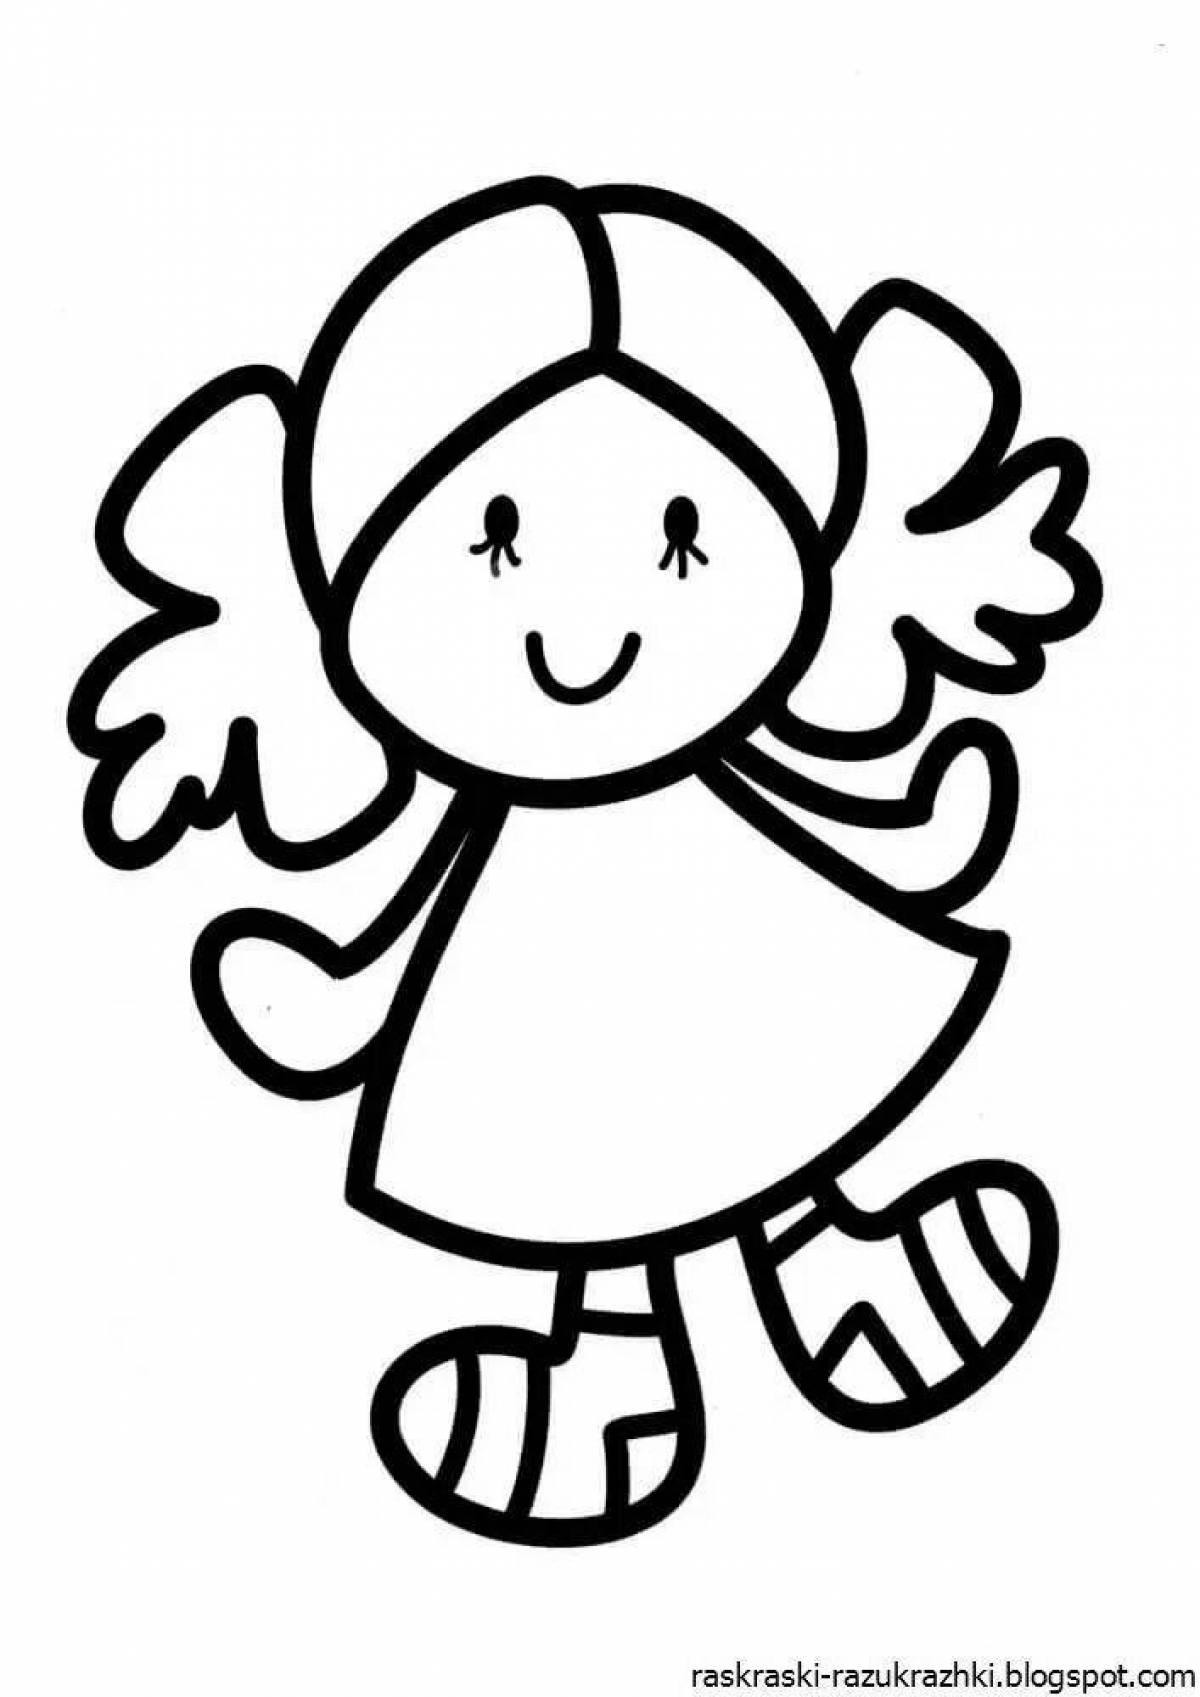 Cute baby doll coloring book